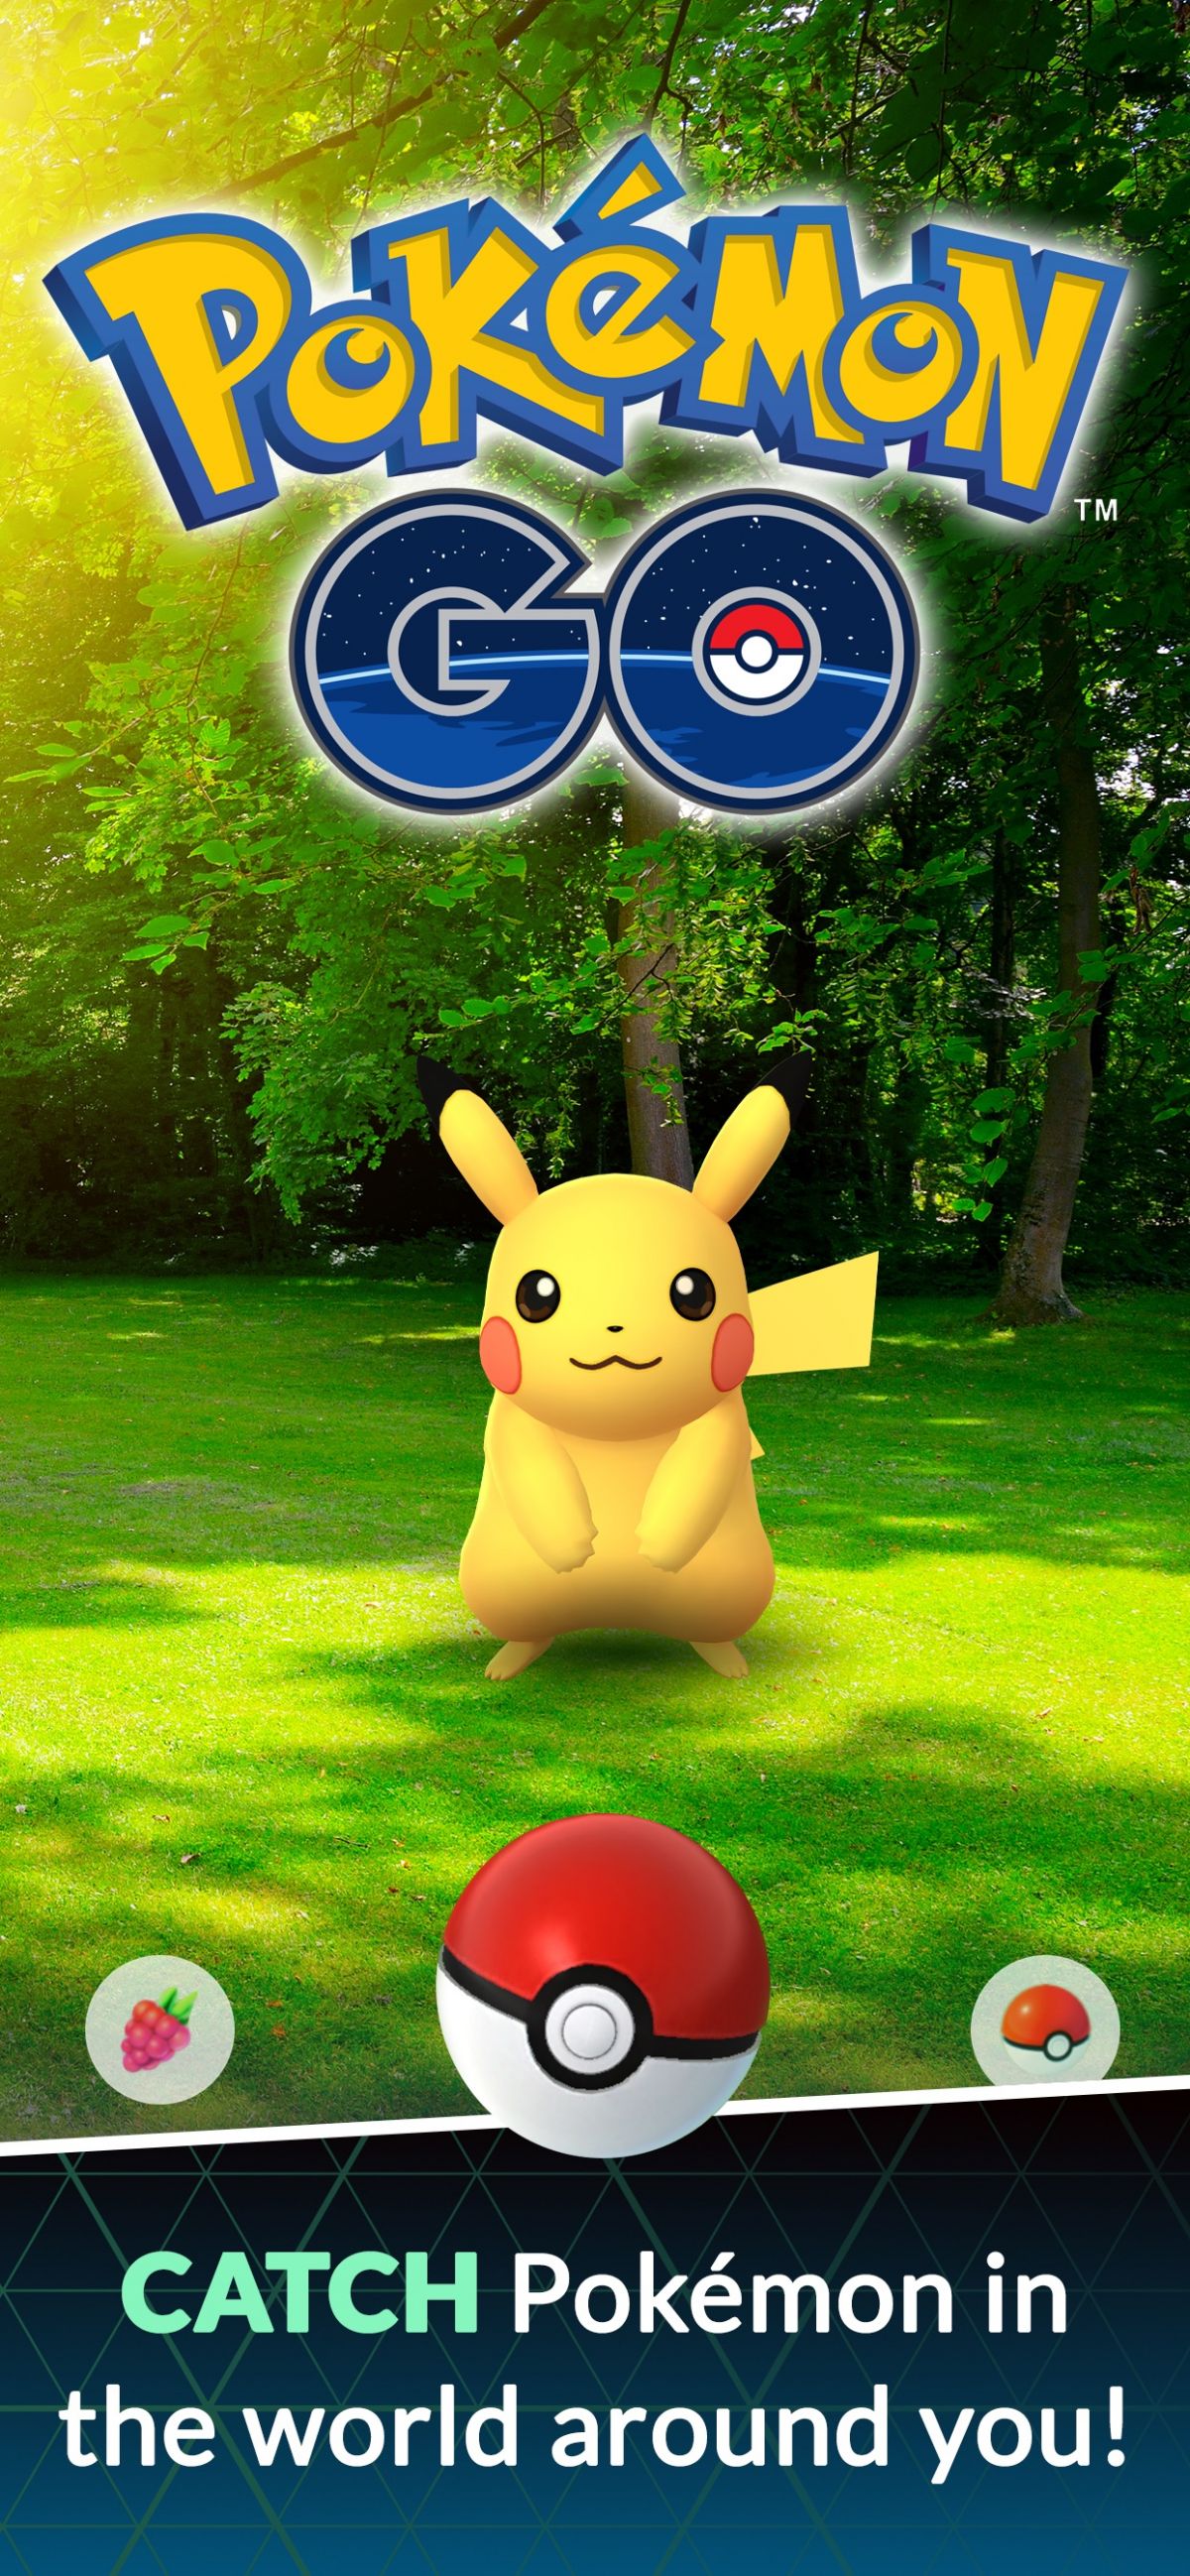 pokemon-go-we-update-our-recommendations-daily-the-latest-and-most